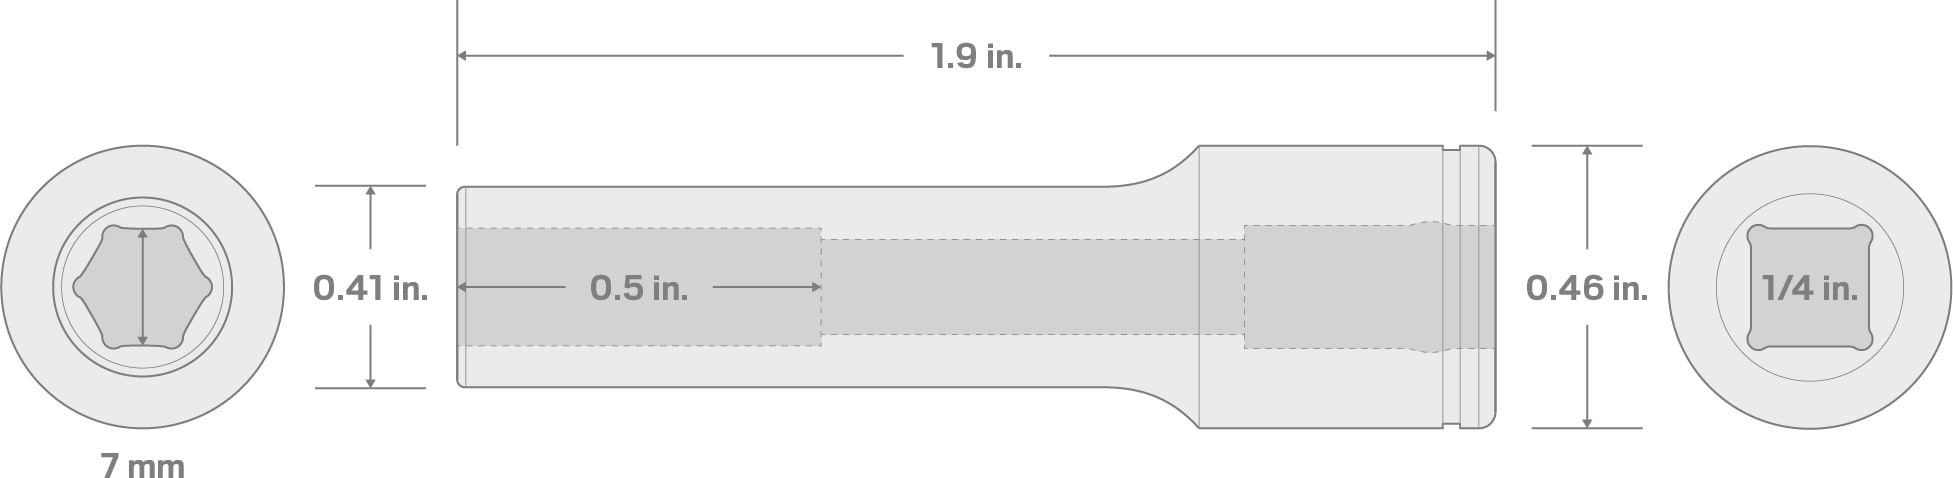 Specs for 1/4 Inch Drive x 7 mm Deep 6-Point Socket